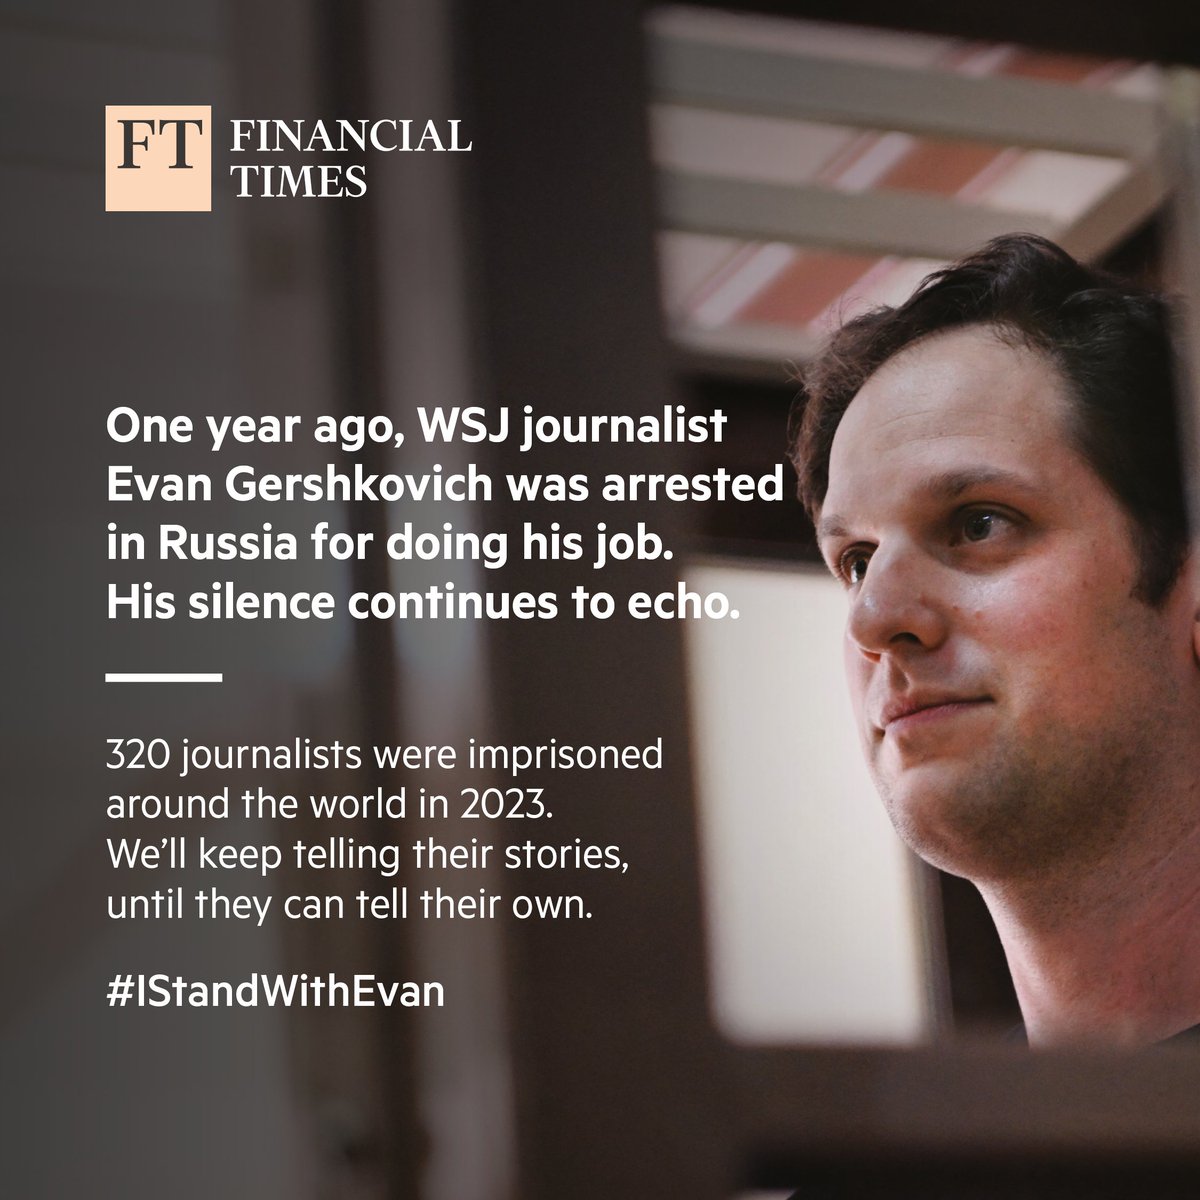 Today marks one year since WSJ journalist Evan Gershkovich was detained by Russia on March 29, 2023. #istandwithevan